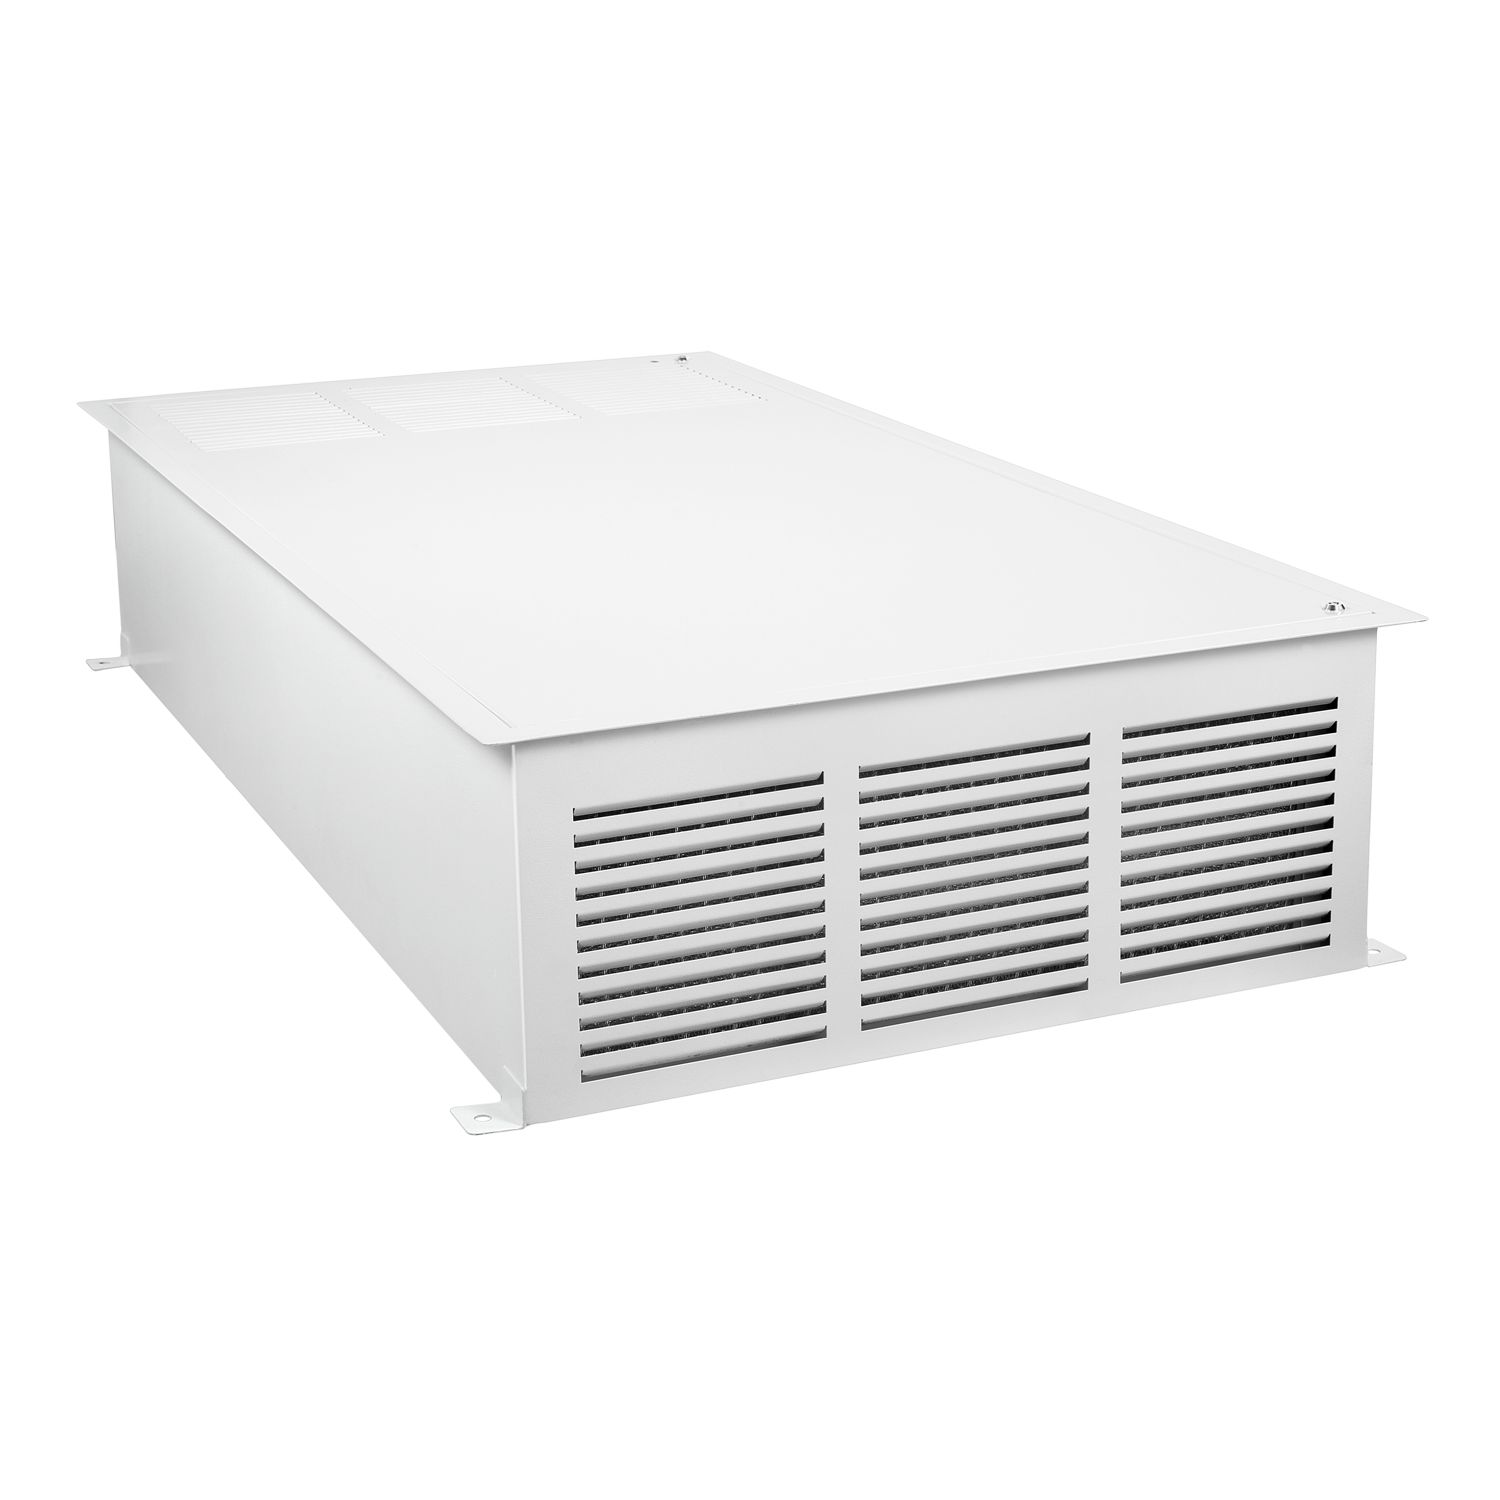 PS-501T4 Ceiling Mounted Bipolar Ionization Air Purifier 